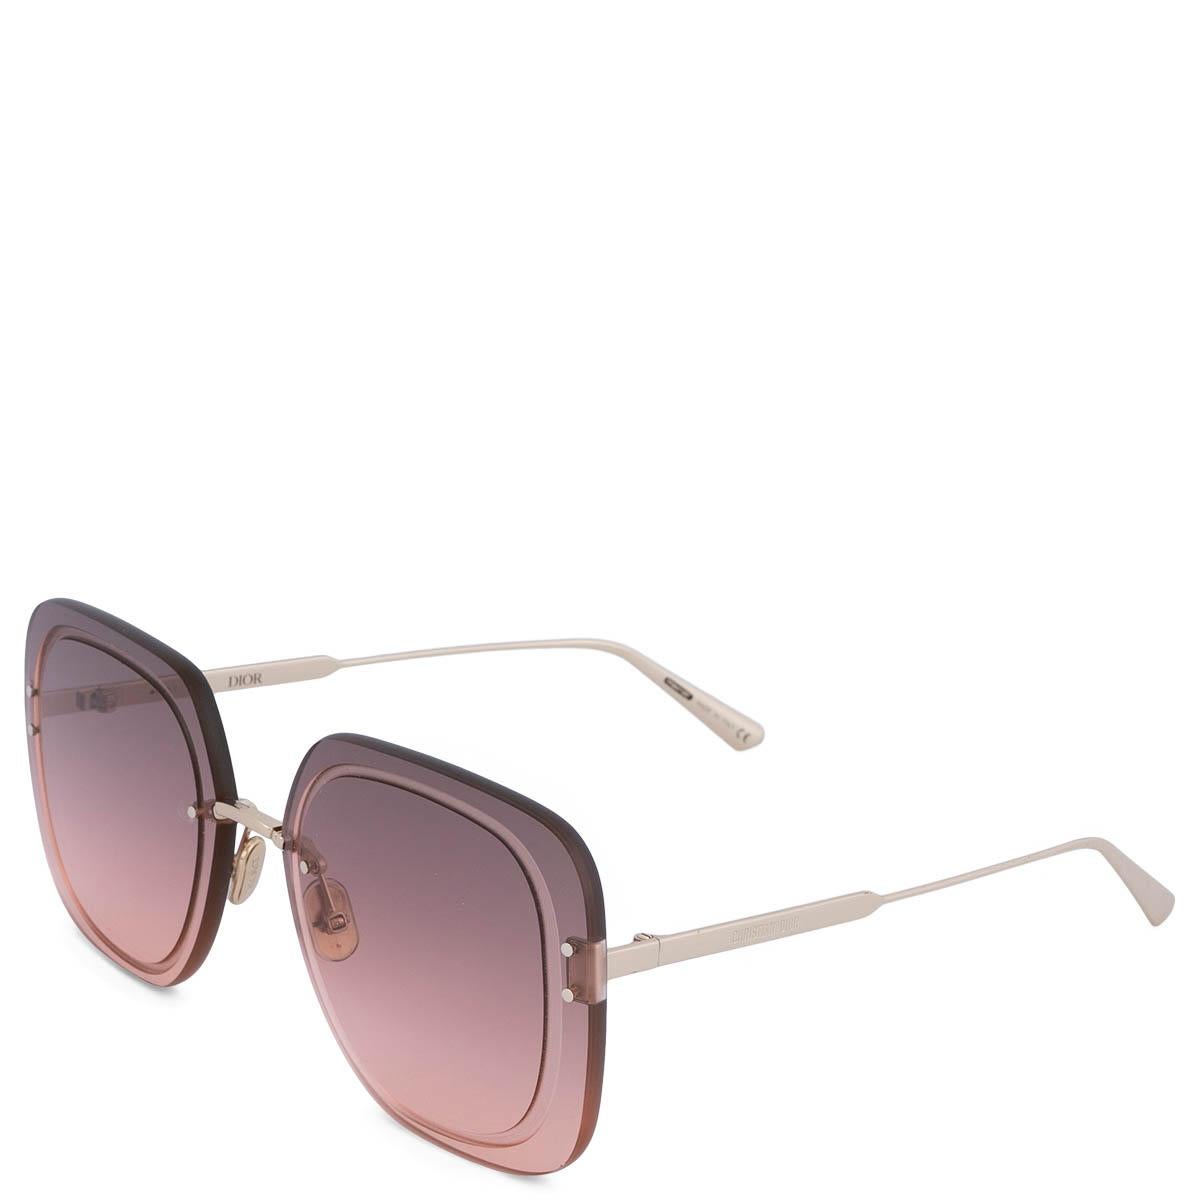 100% authentic Christian Dior UltraDior CD40031U sunglasses in light brown and light pink acetate whit gold-tone details and gradient brown lenses. Have been worn and are in excellent condition. Come with case.

Measurements
Model	Christian Dior